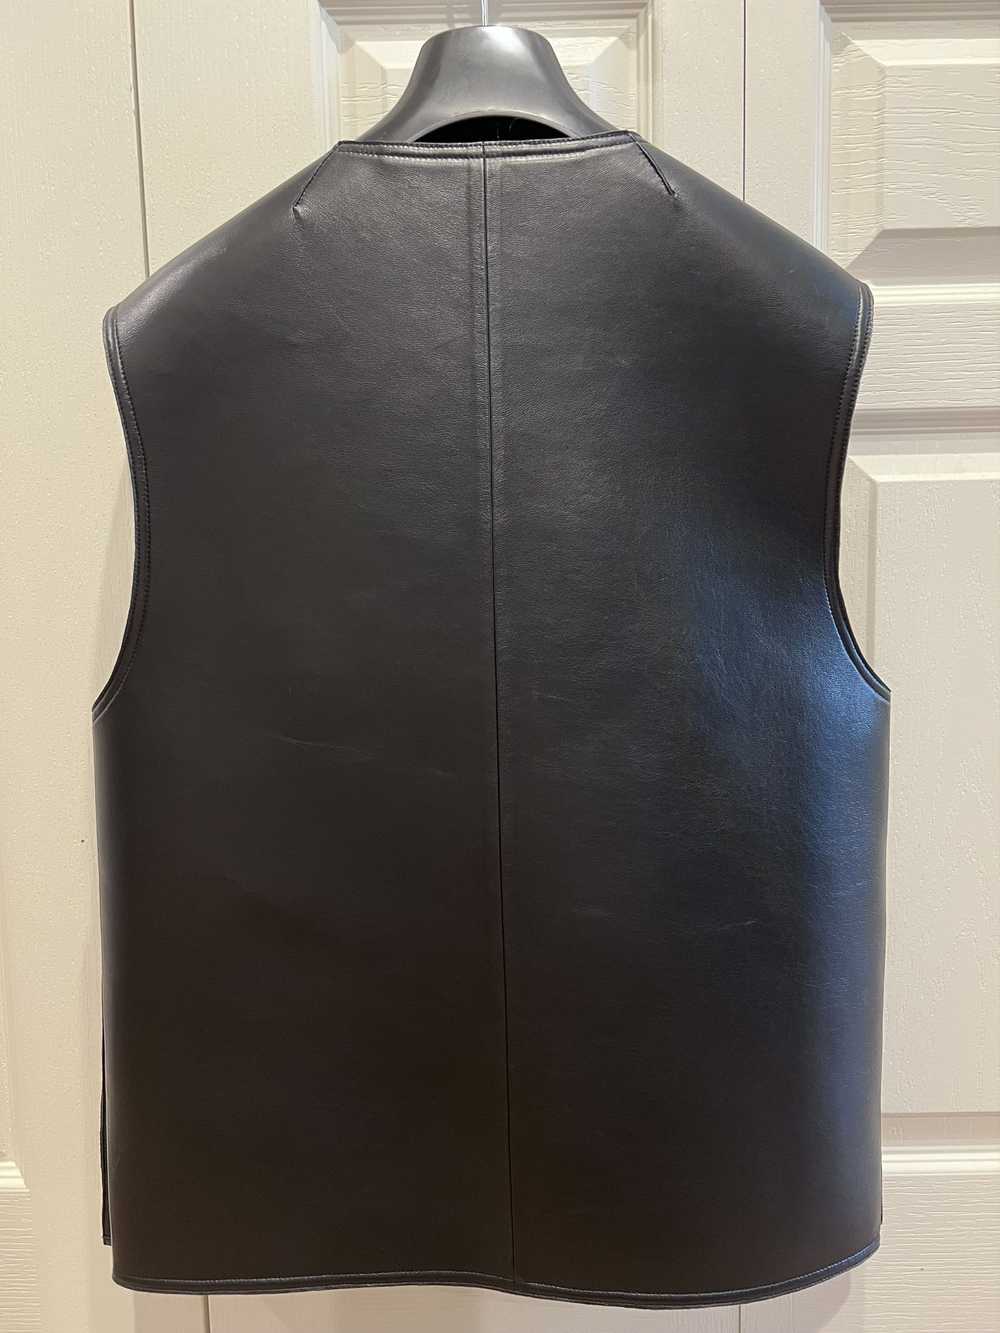 Givenchy Givenchy leather cargo vest - image 10